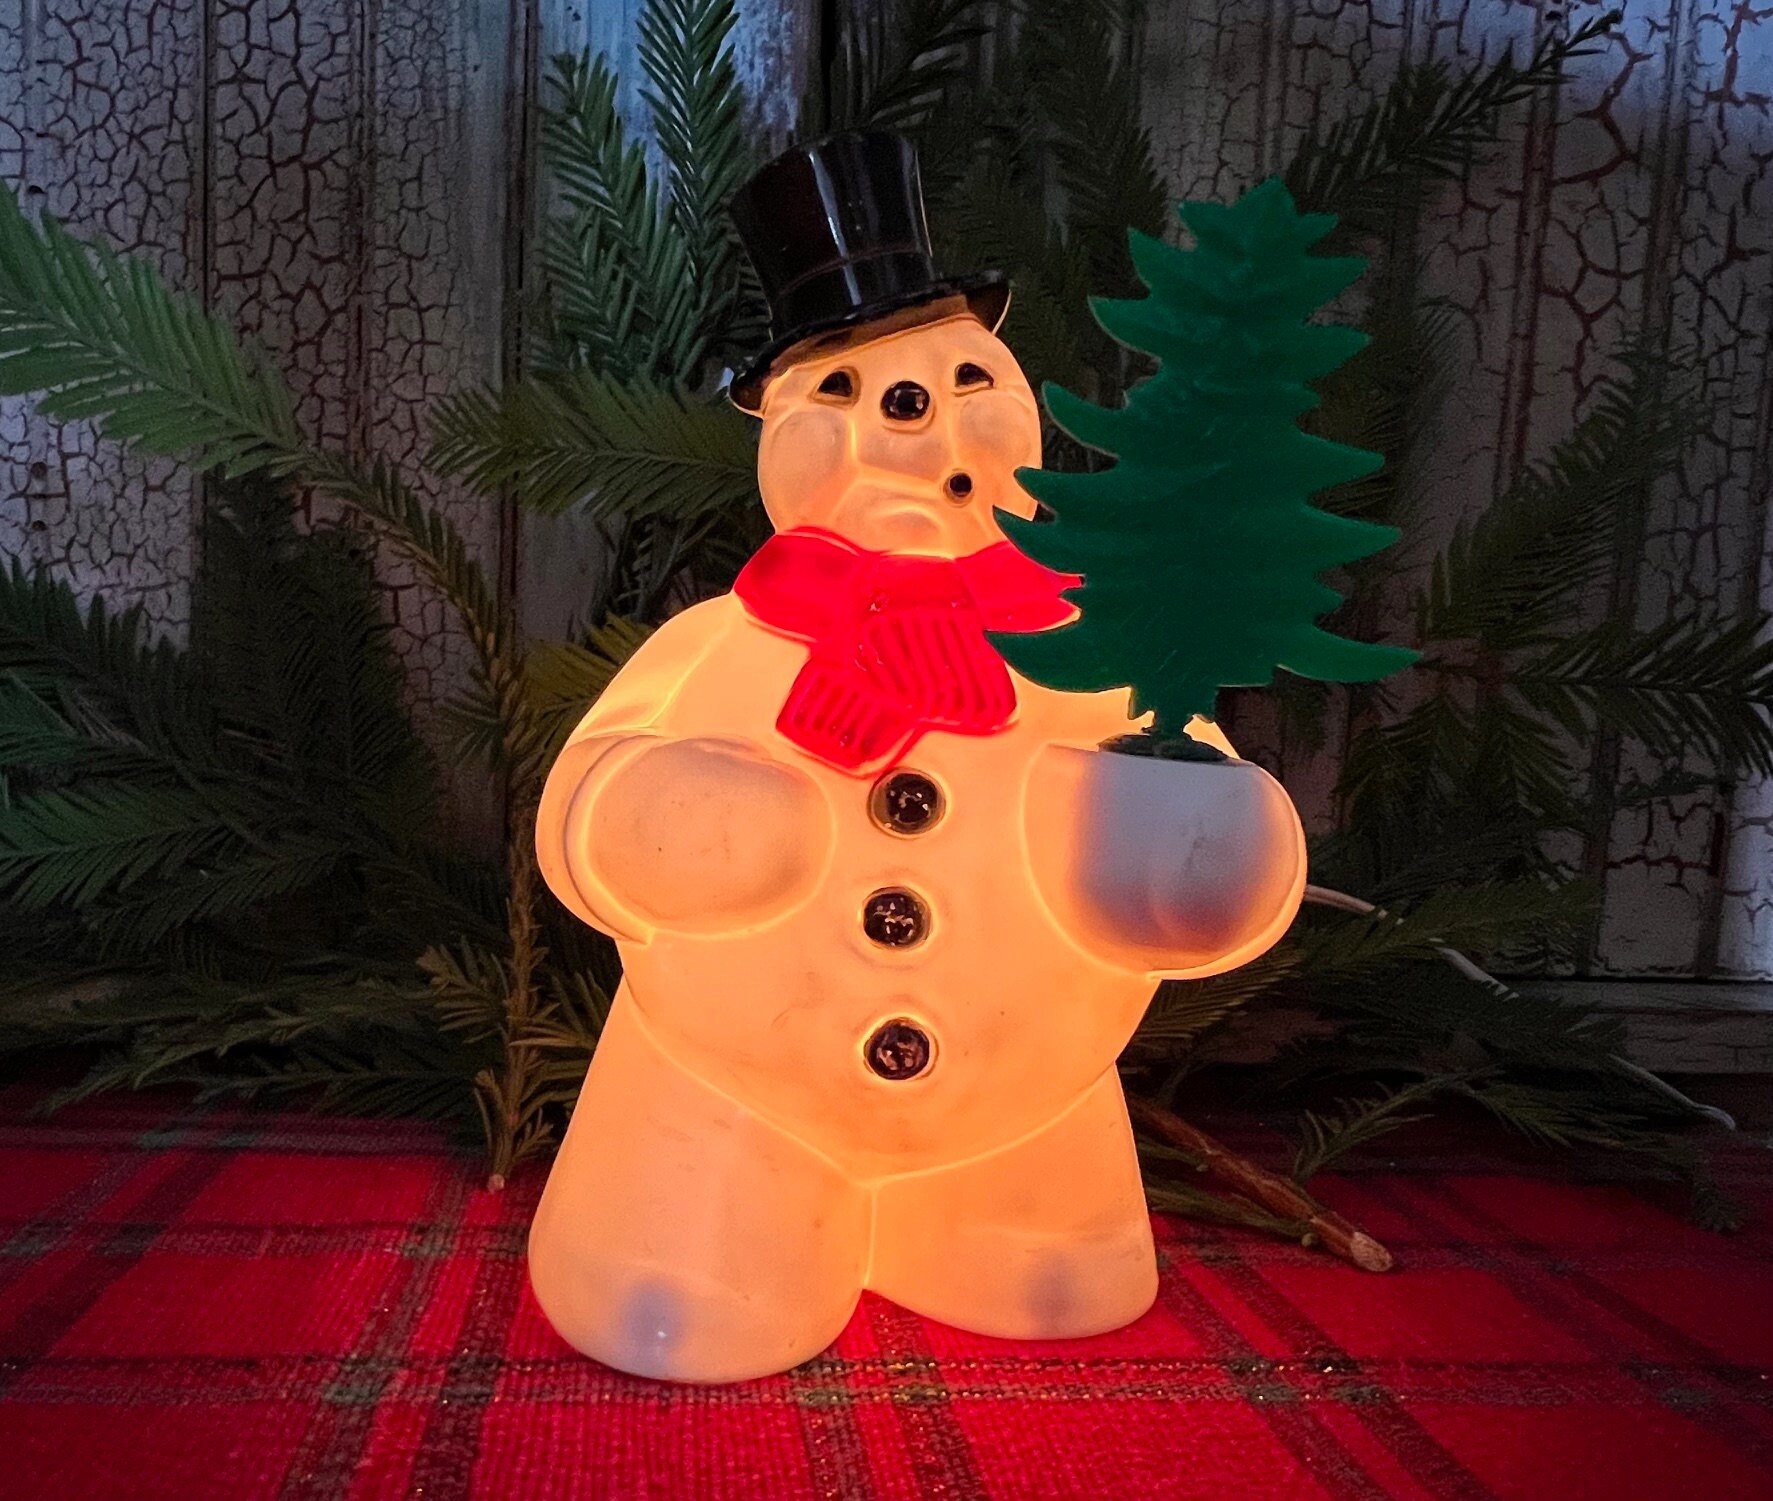 Vintage Snowman Hand Painted Lights up Christmas & Winter